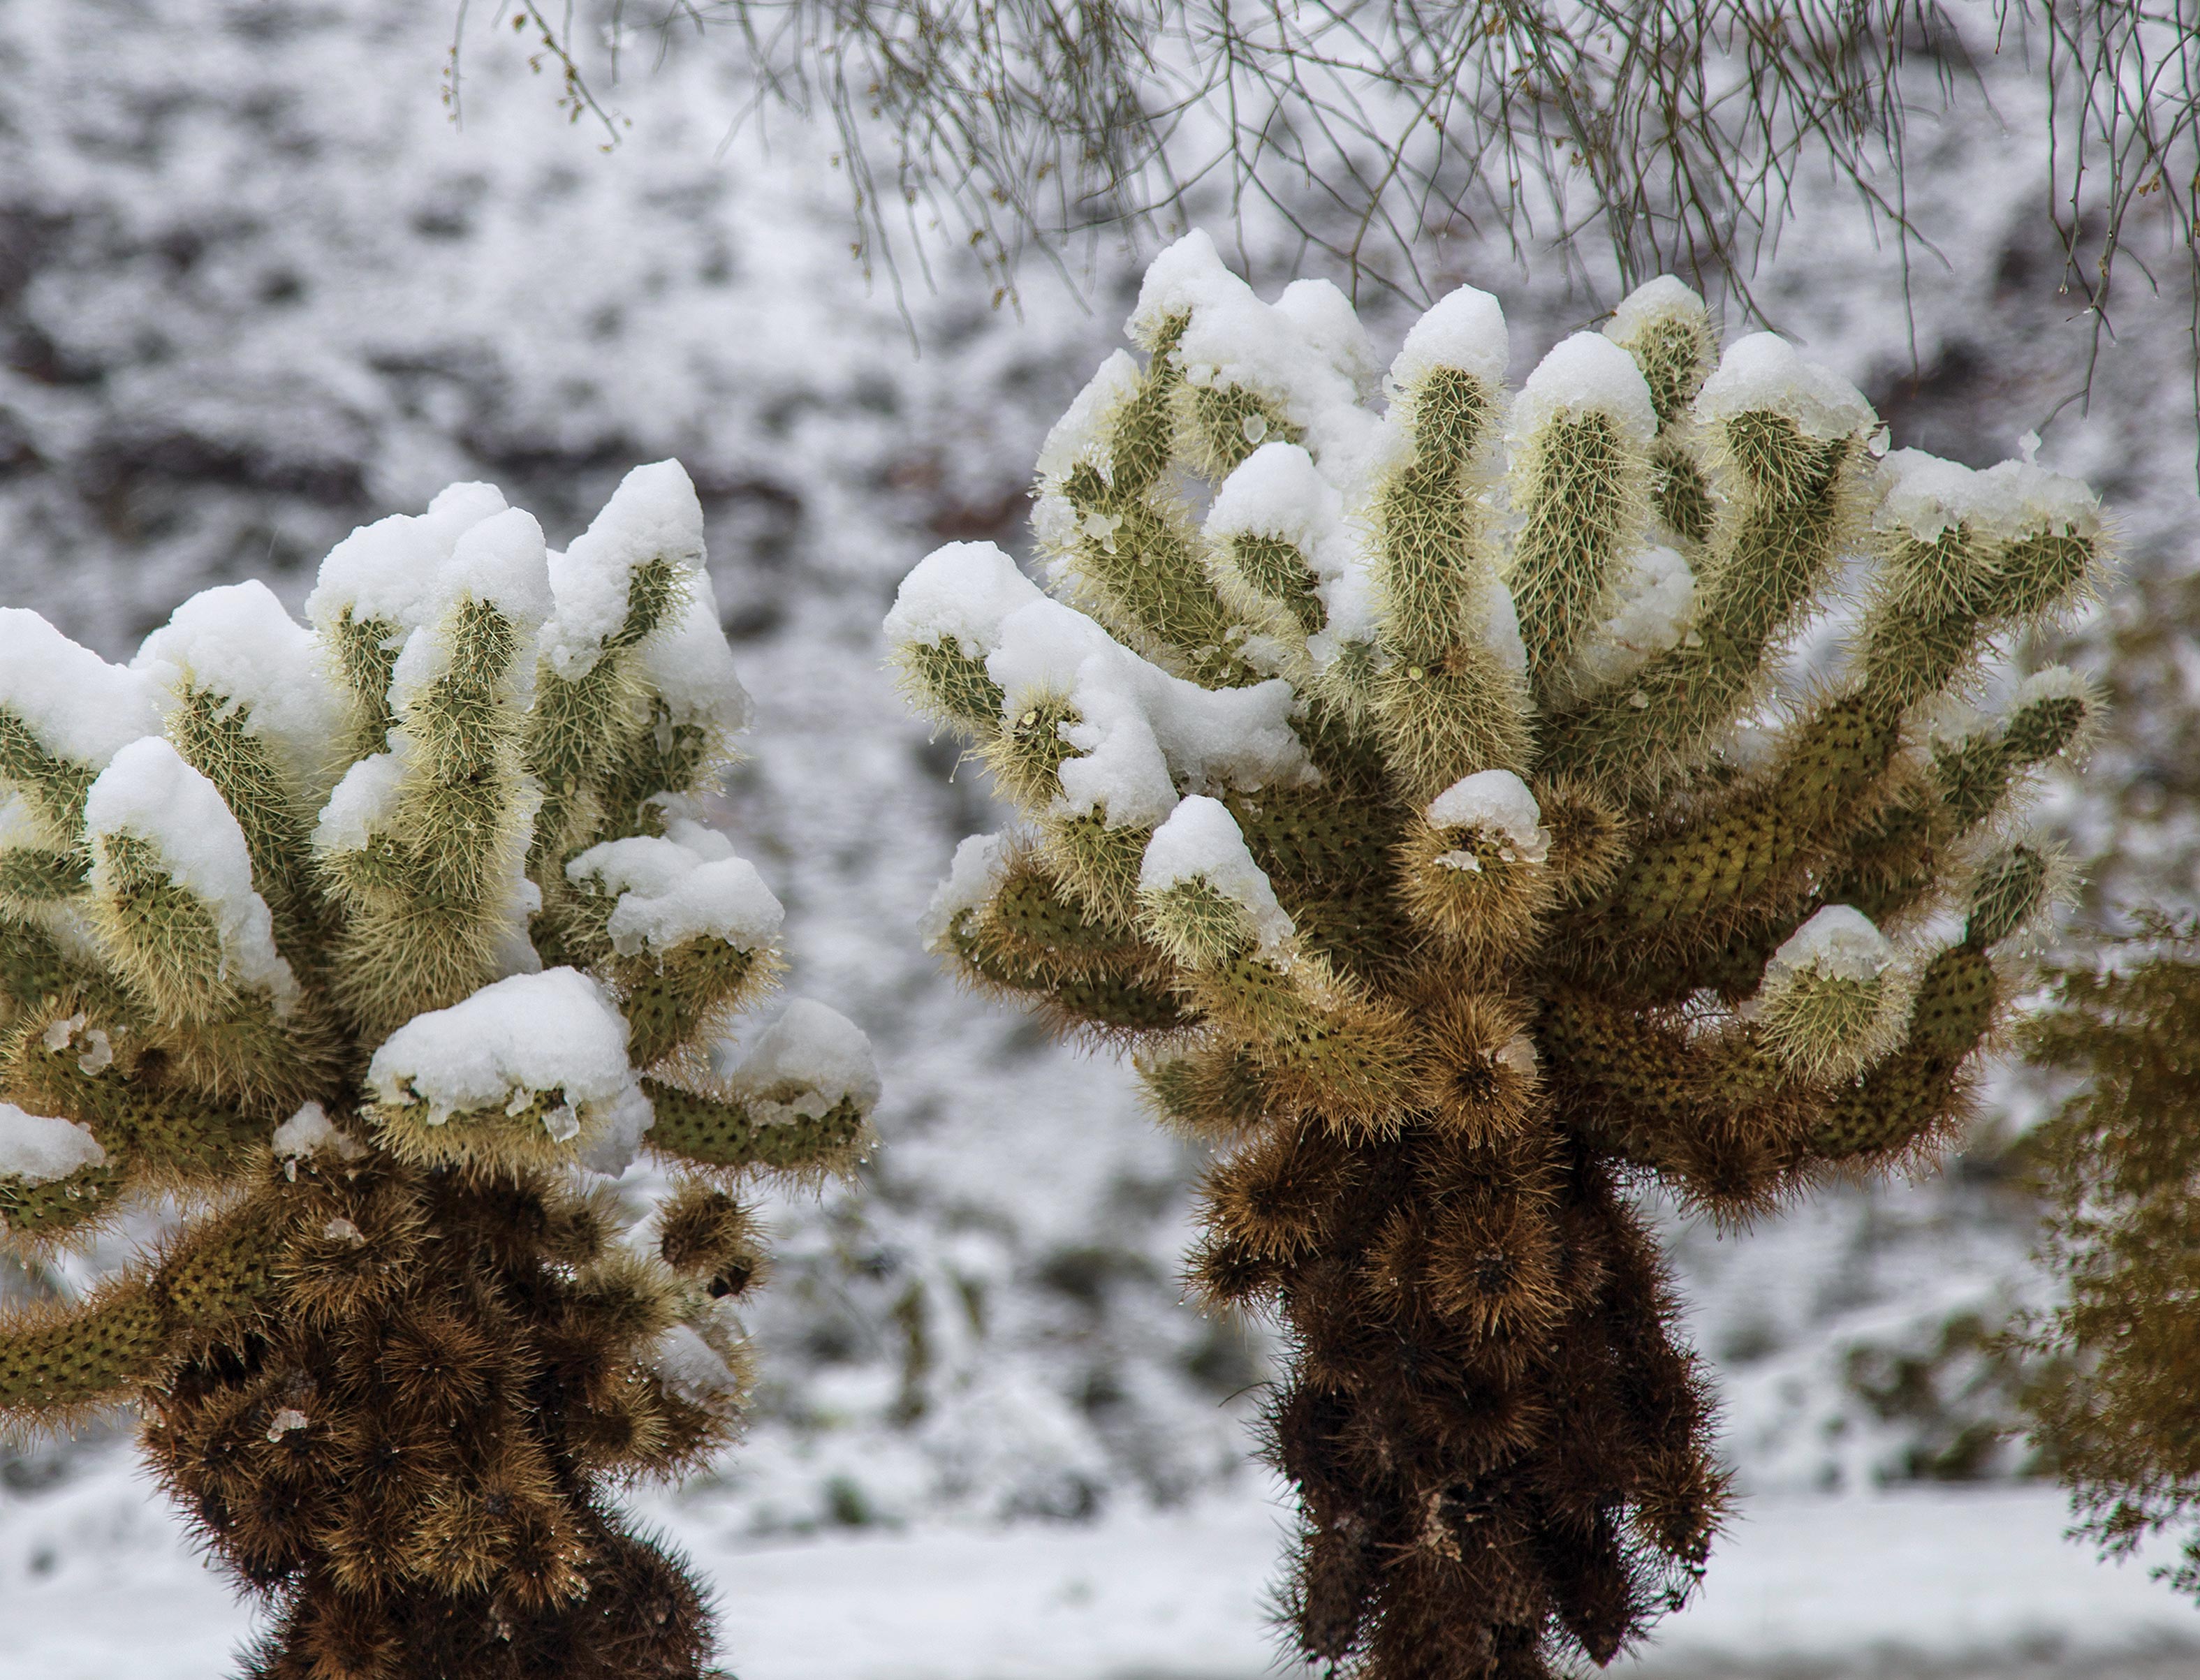 Snow-capped Cholla from rare 2019 snow storm in Fountain Hills